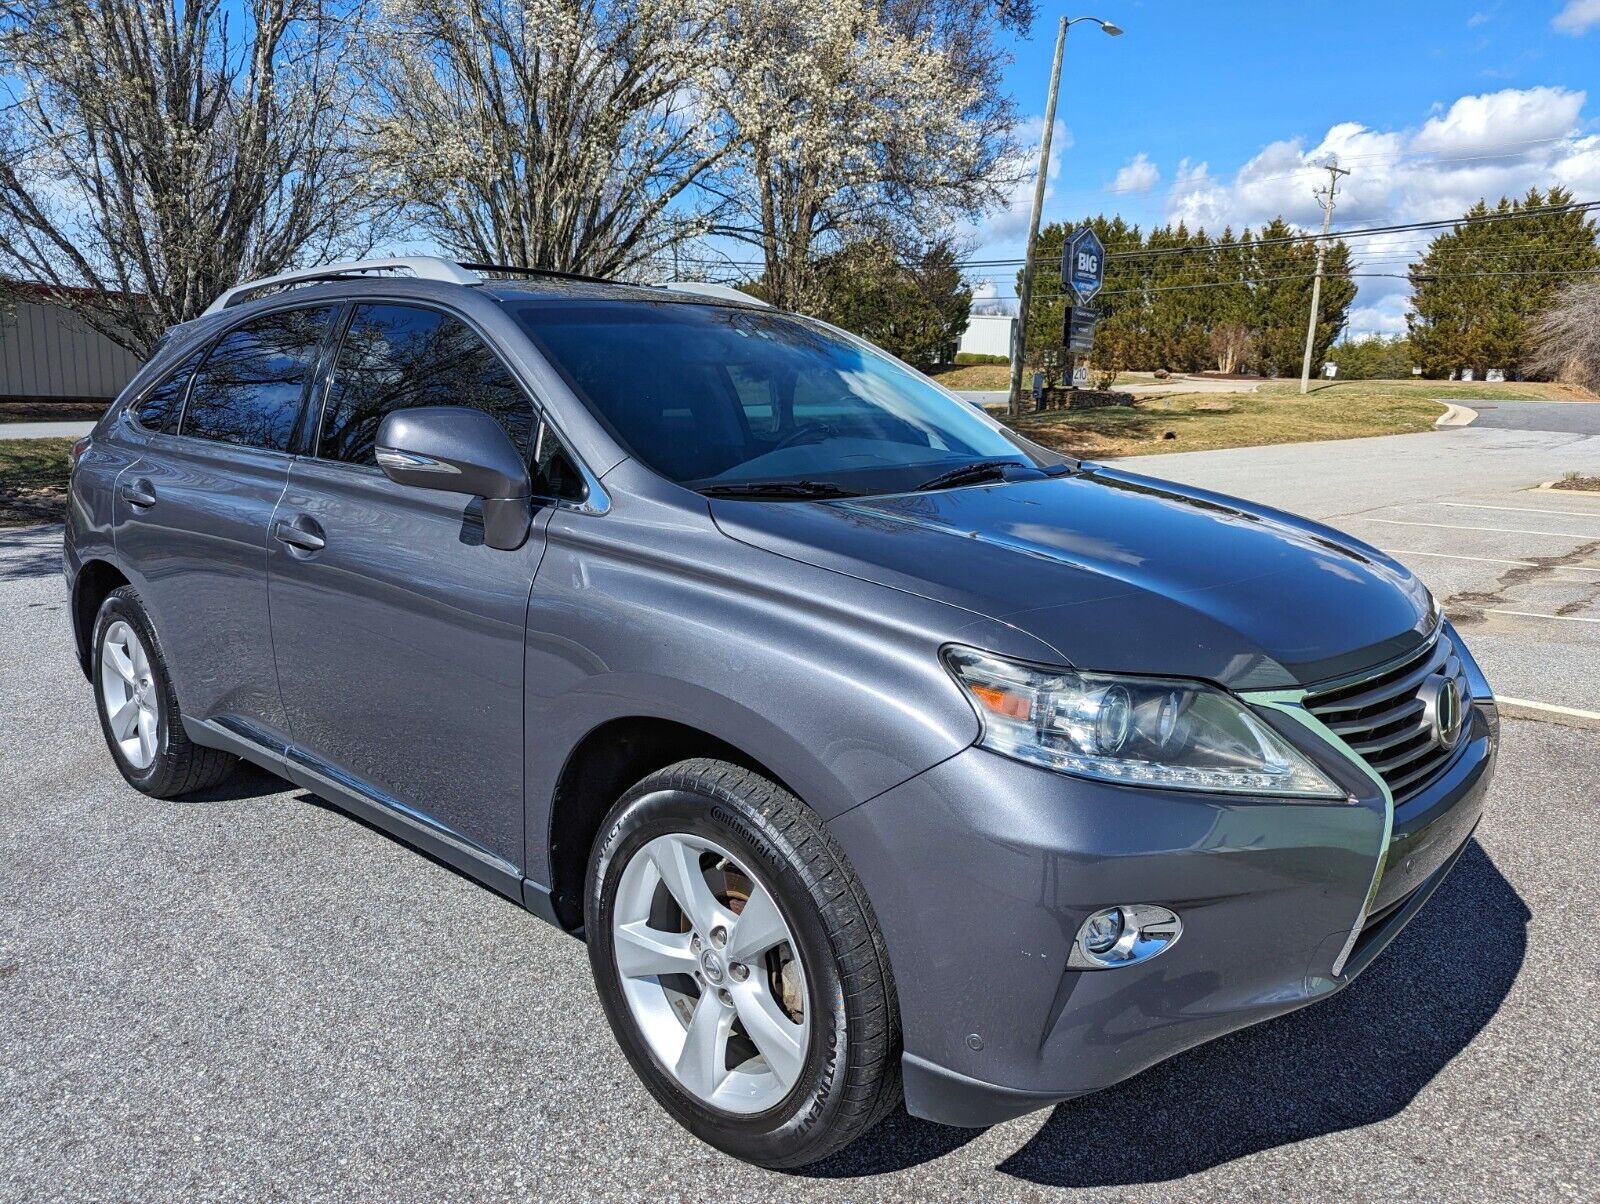 2015 Lexus RX 350 AWD - LOW Miles/CLEAN title - NEW water pump in 2023